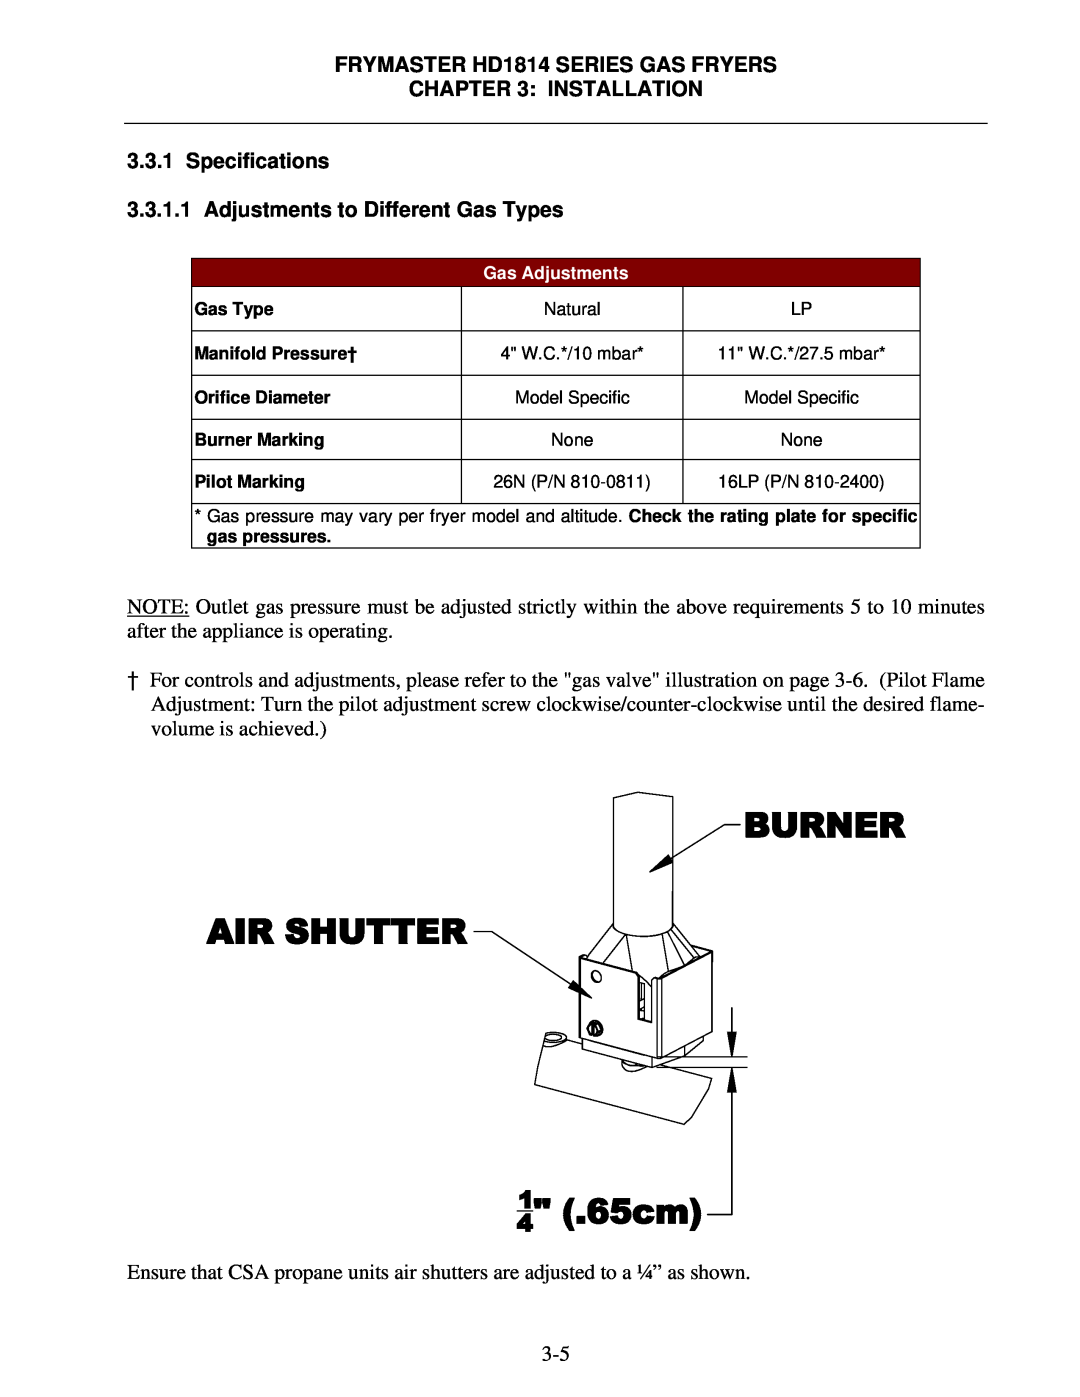 Frymaster HD1814G, HD21814G, HD21814150G operation manual Specifications 3.3.1.1 Adjustments to Different Gas Types 